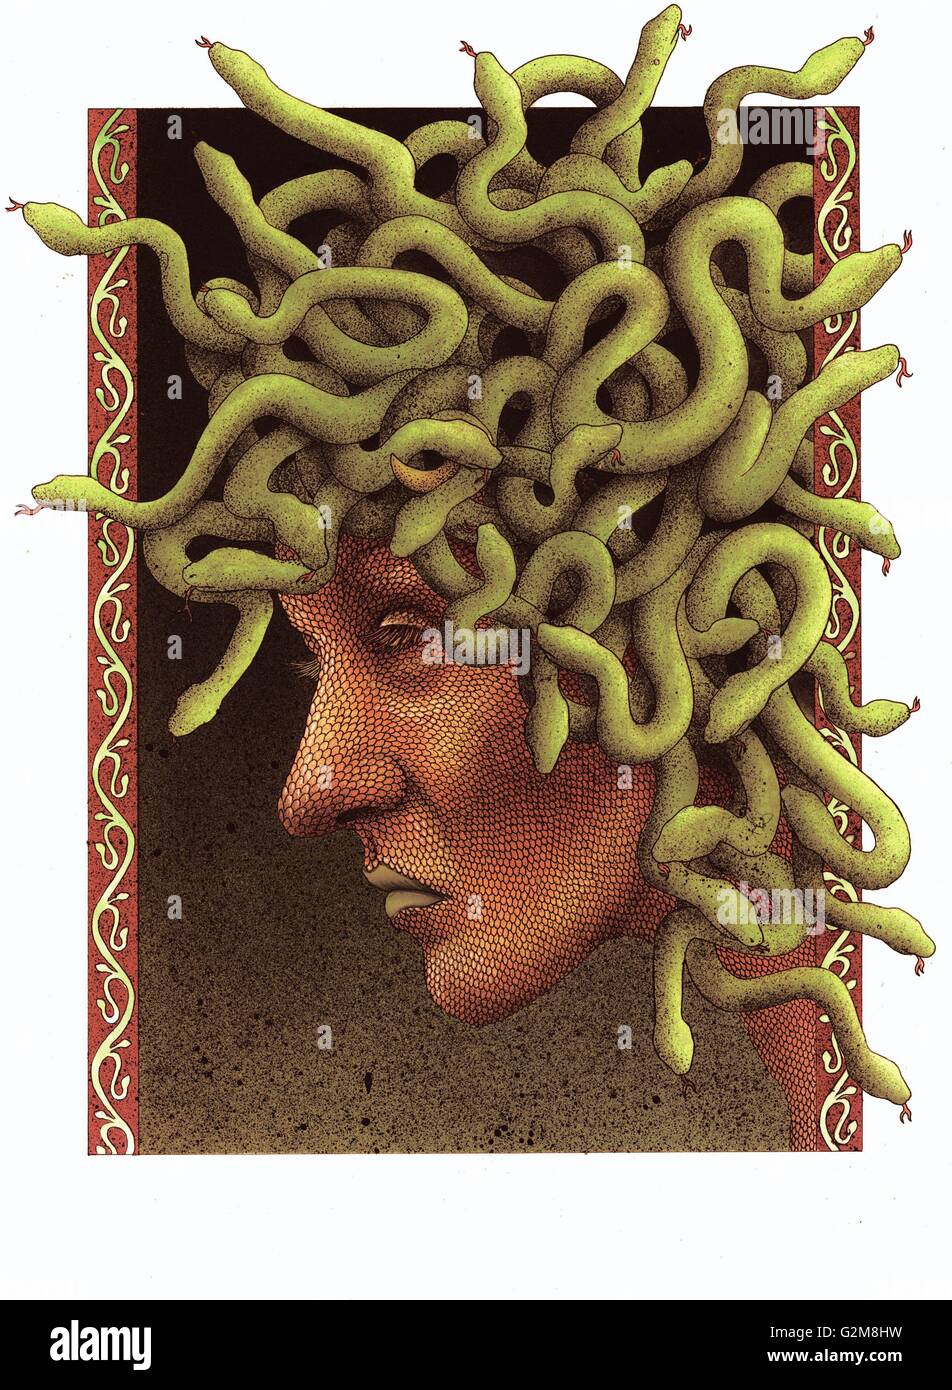 Fantasy image of head with snake hair Stock Photo